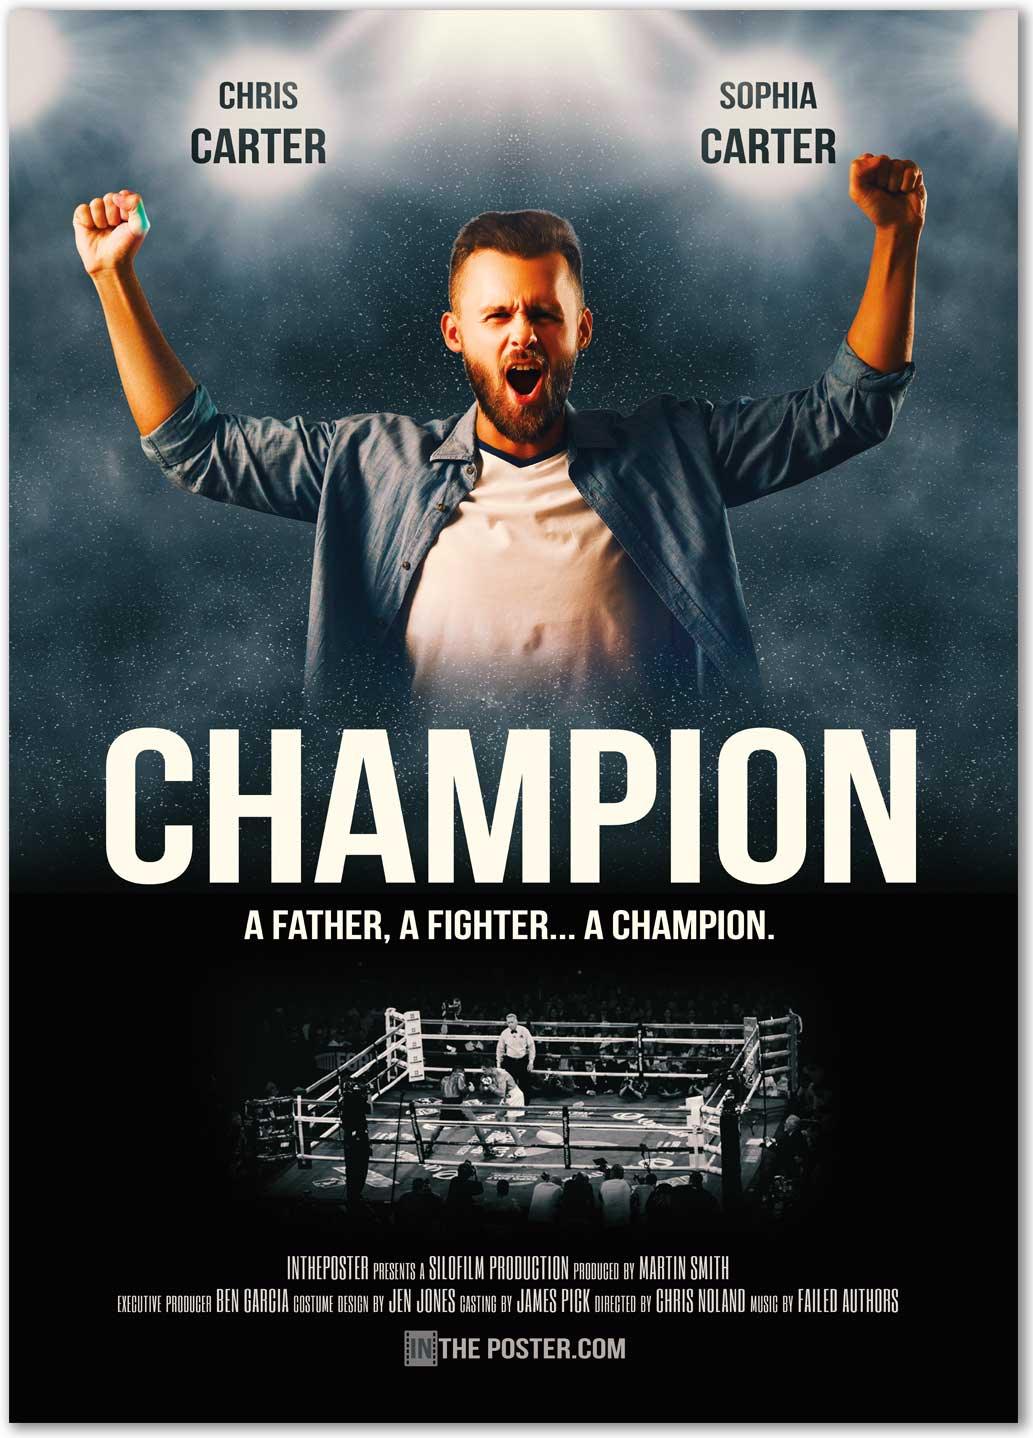 Boxing movie poster with a boxing ring and a man celebrating victory with his hands raised.